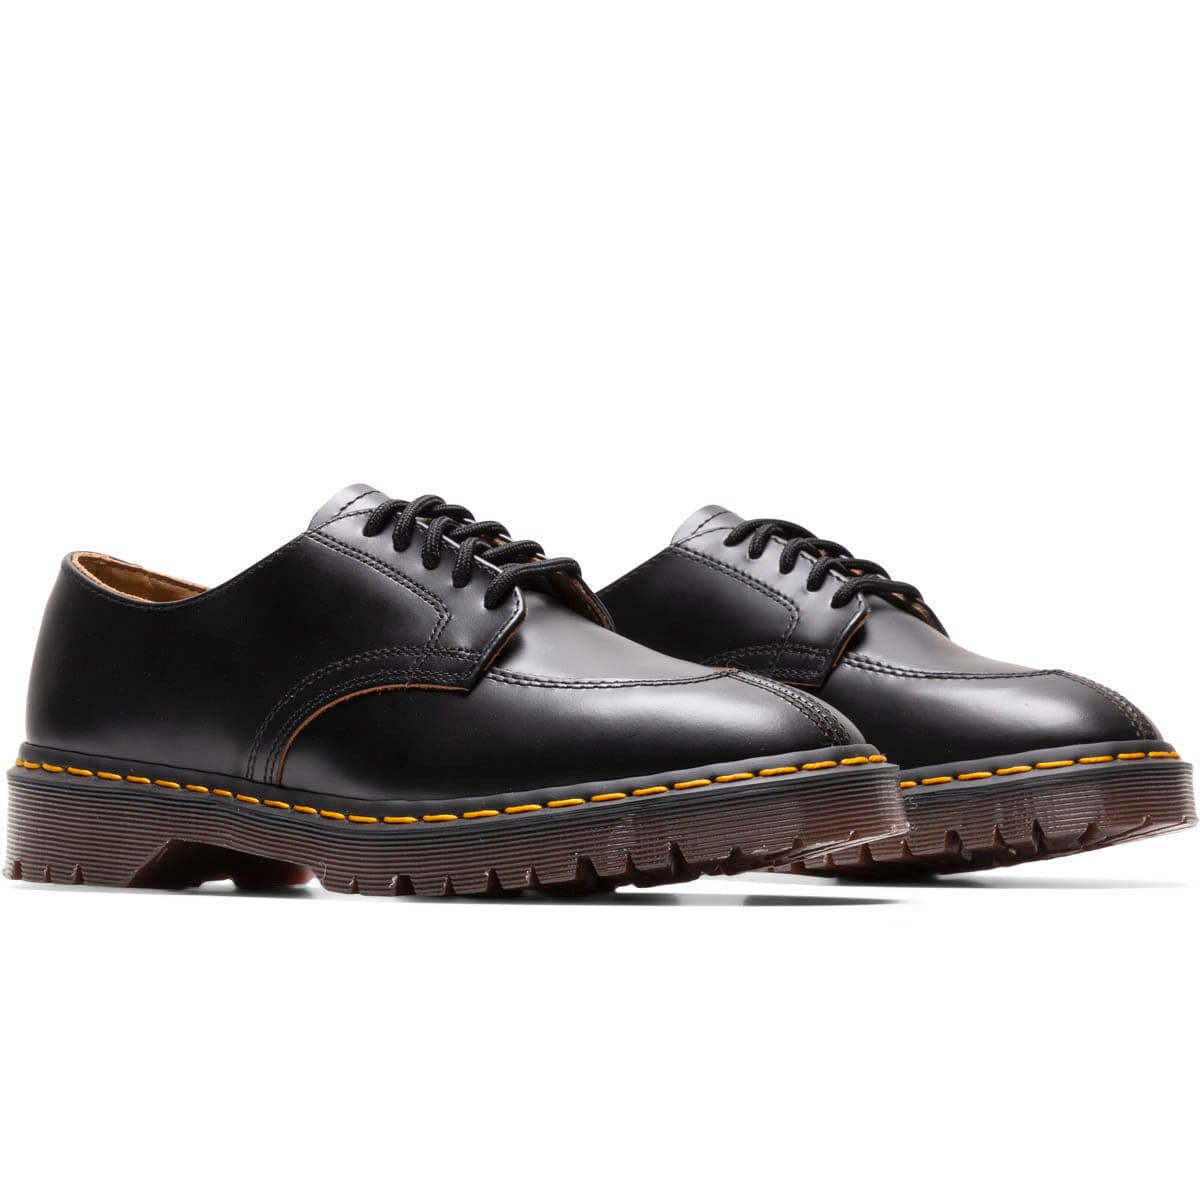 Dr. Martens Casual 2046